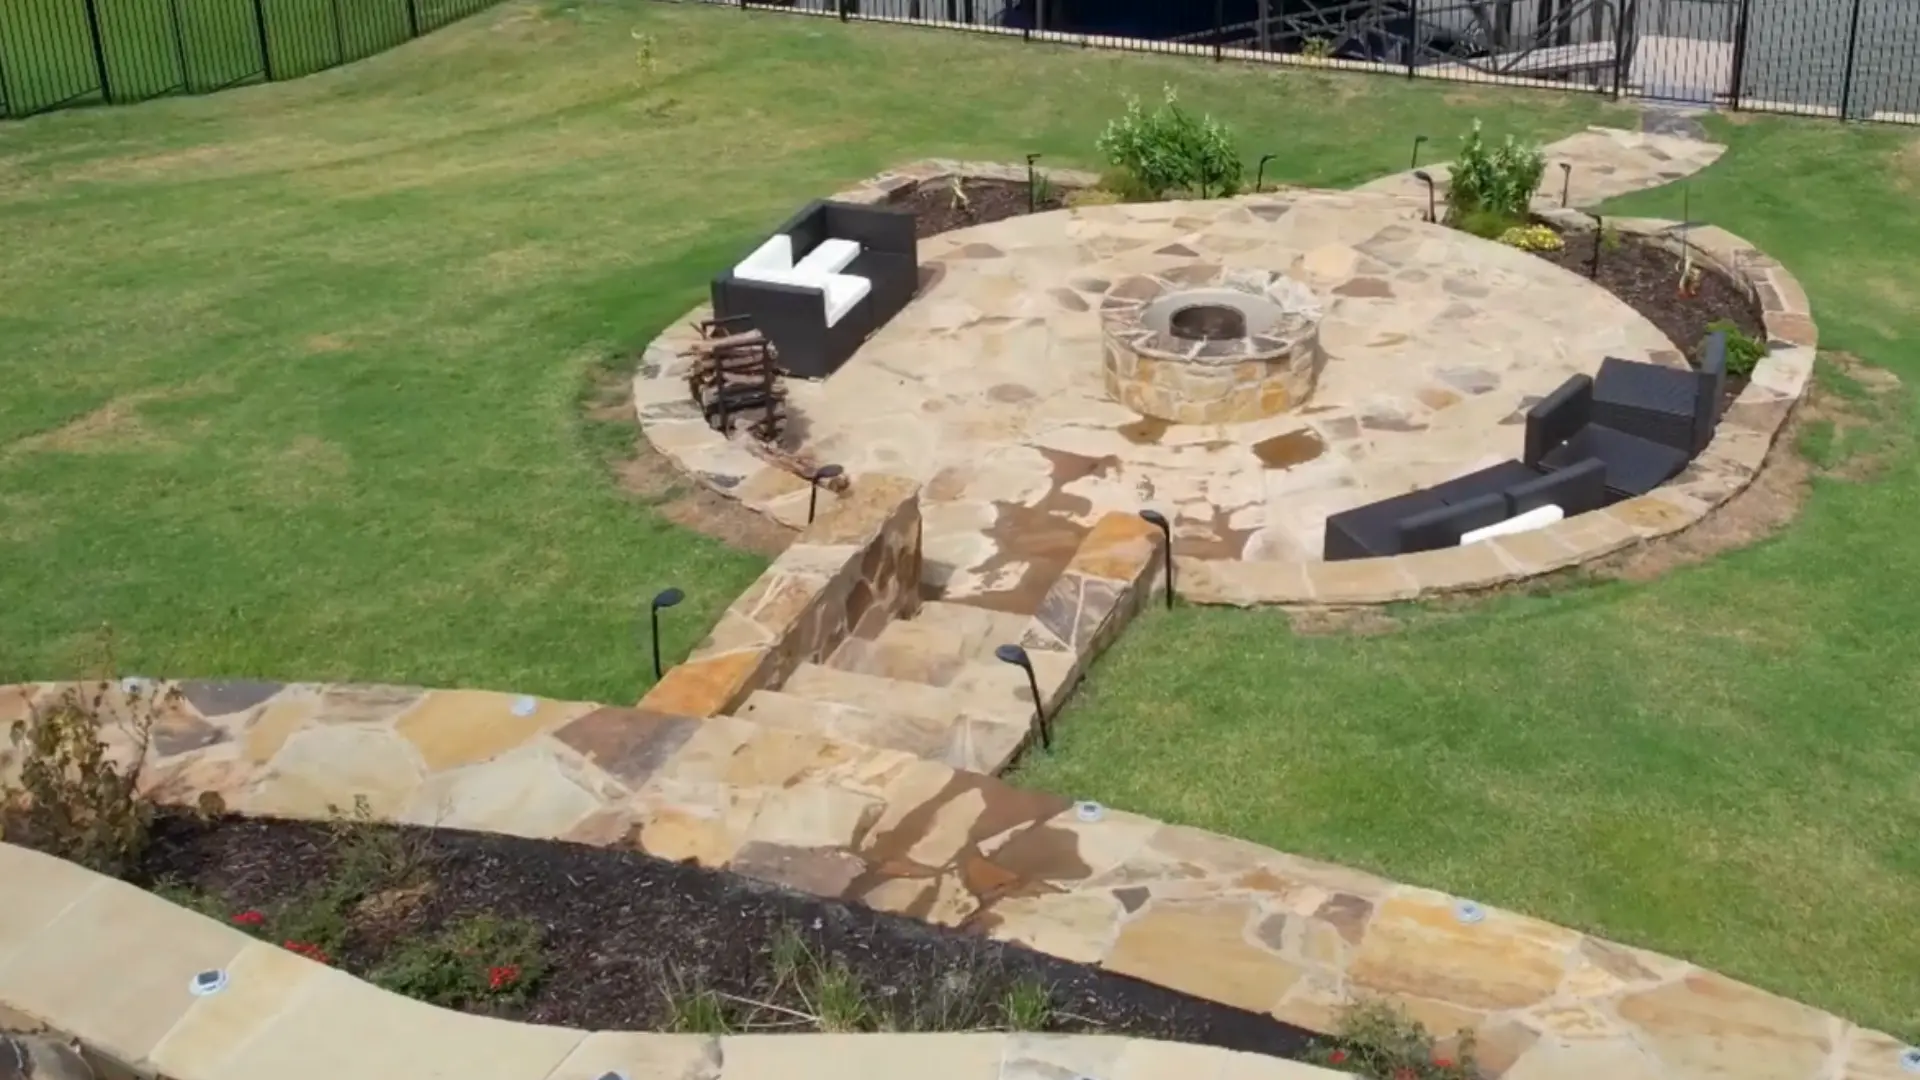 Enhanced Backyard in Fort Worth, TX - New Patio, Fire Pit, Retaining Wall & More!